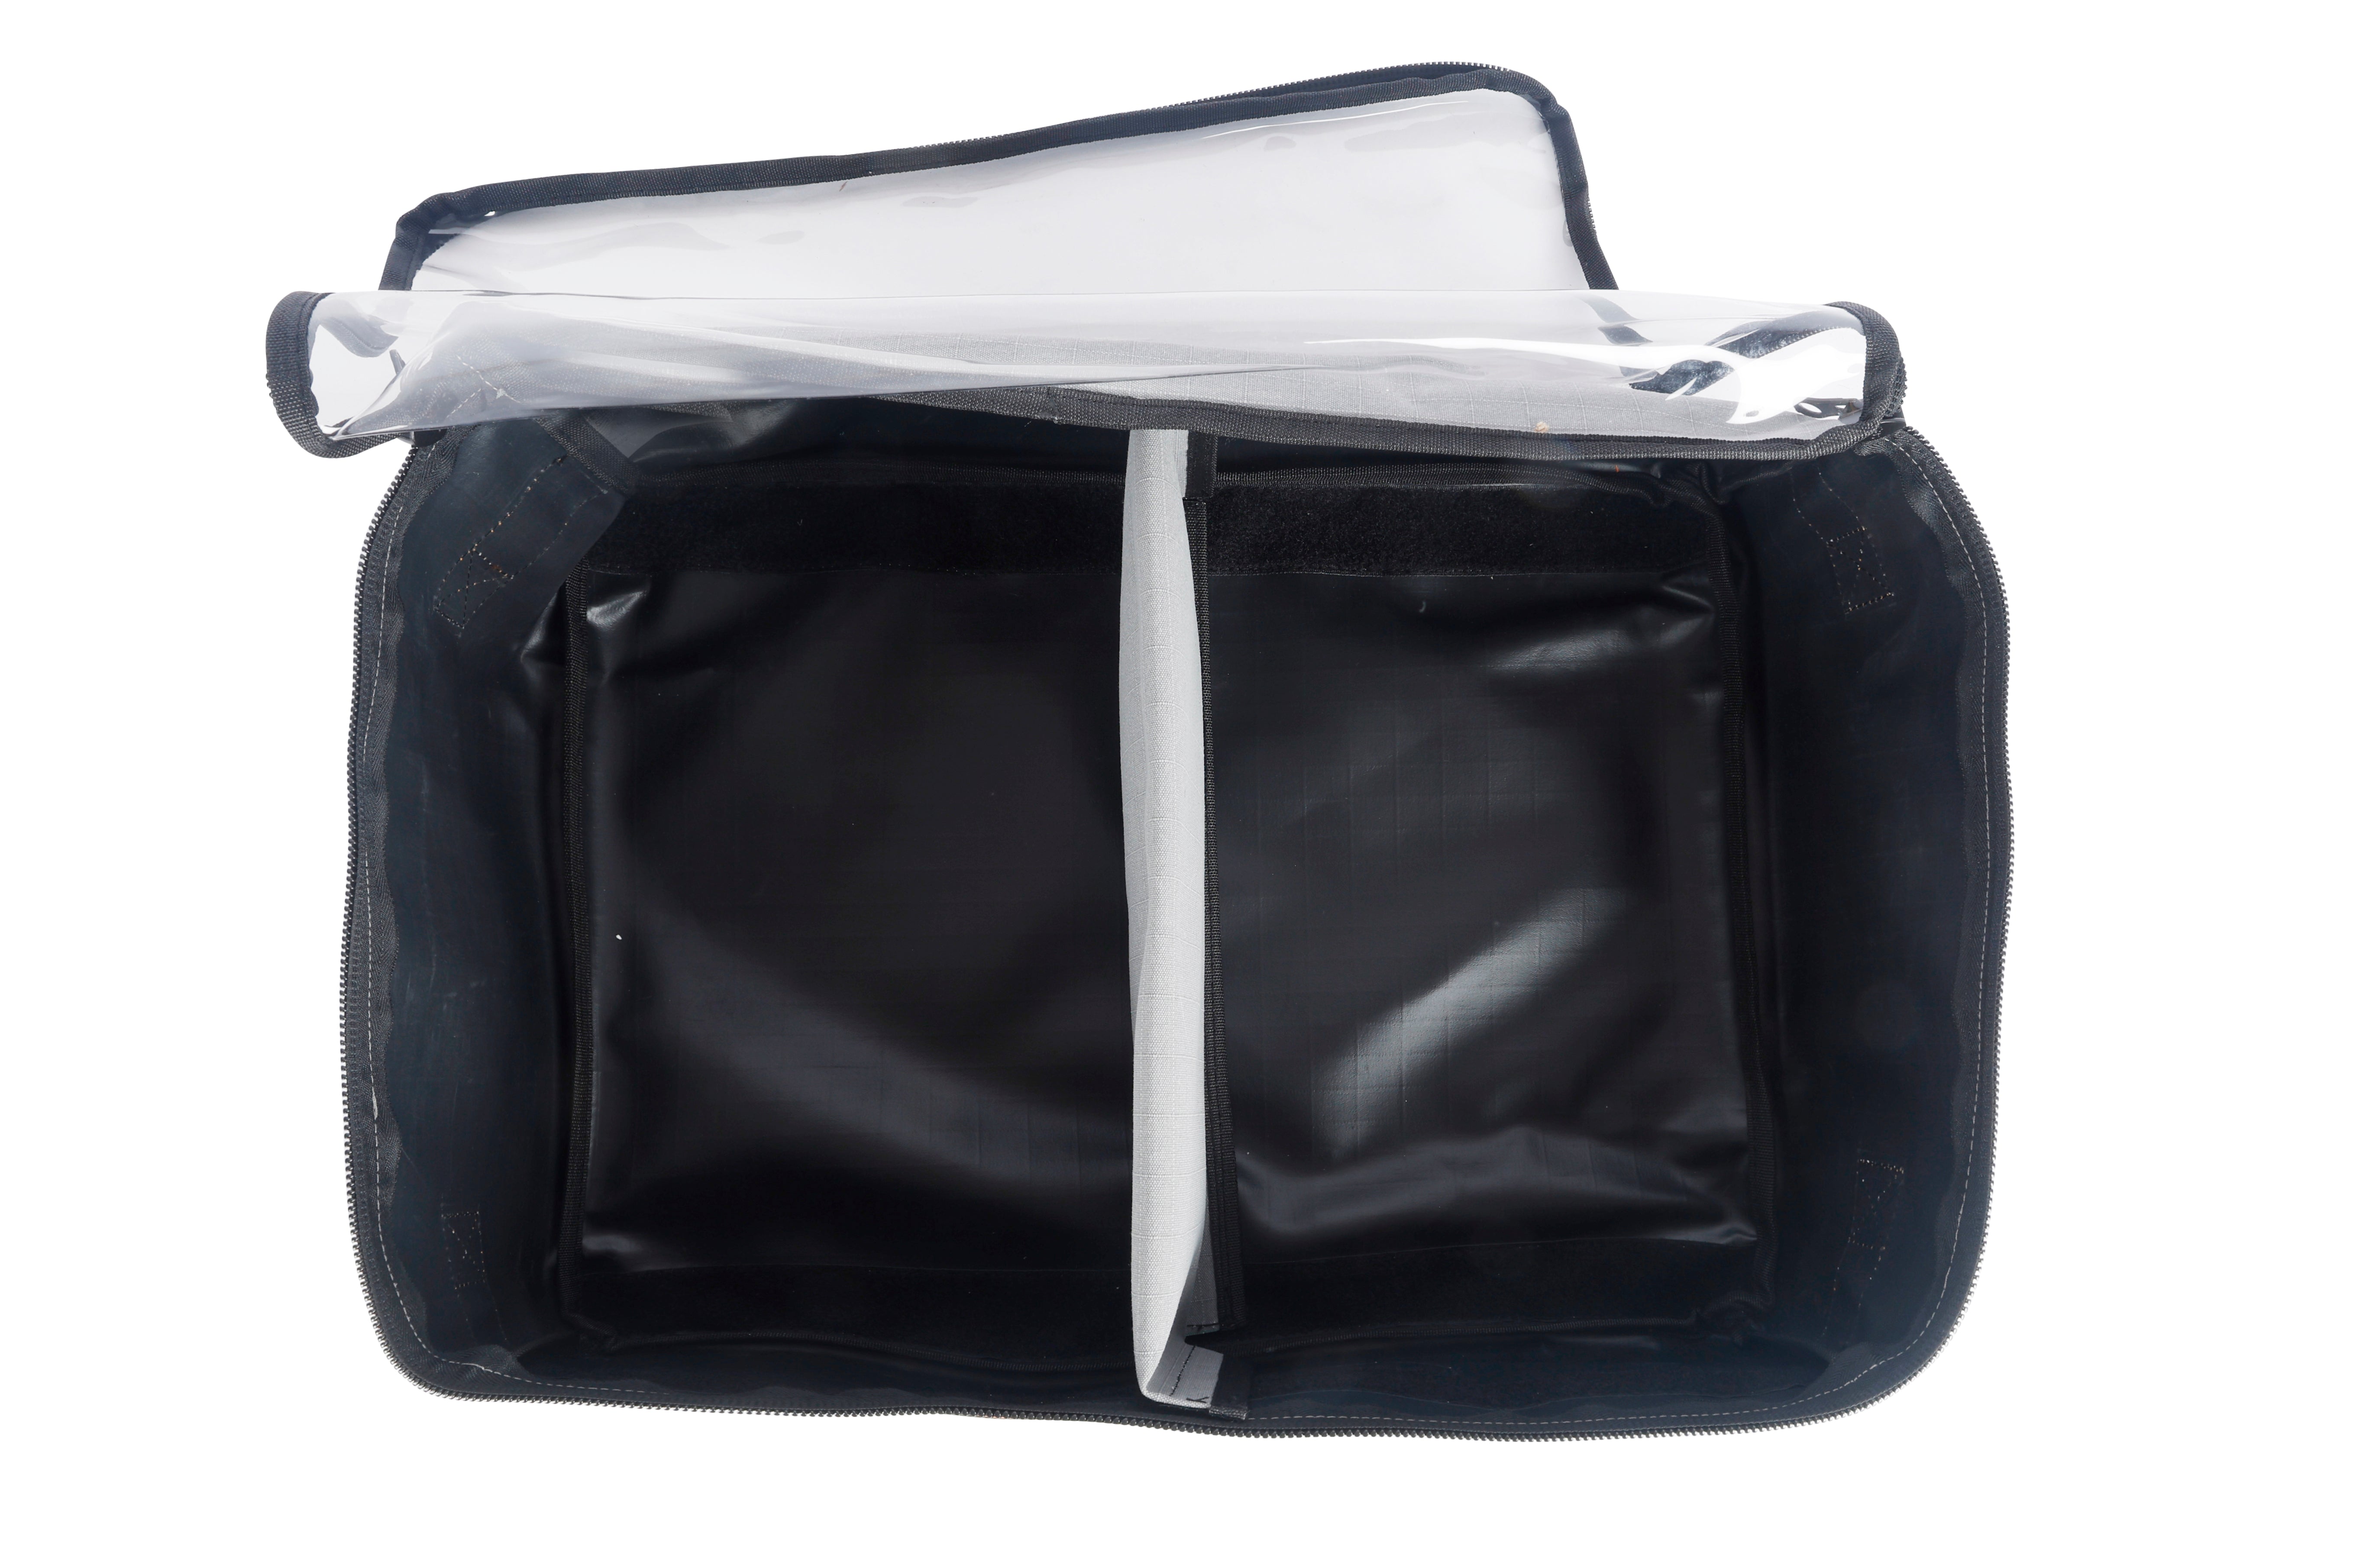 LARGE CANVAS CLEAR TOP STORAGE BAG - 400GSM RIPSTOP CANVAS